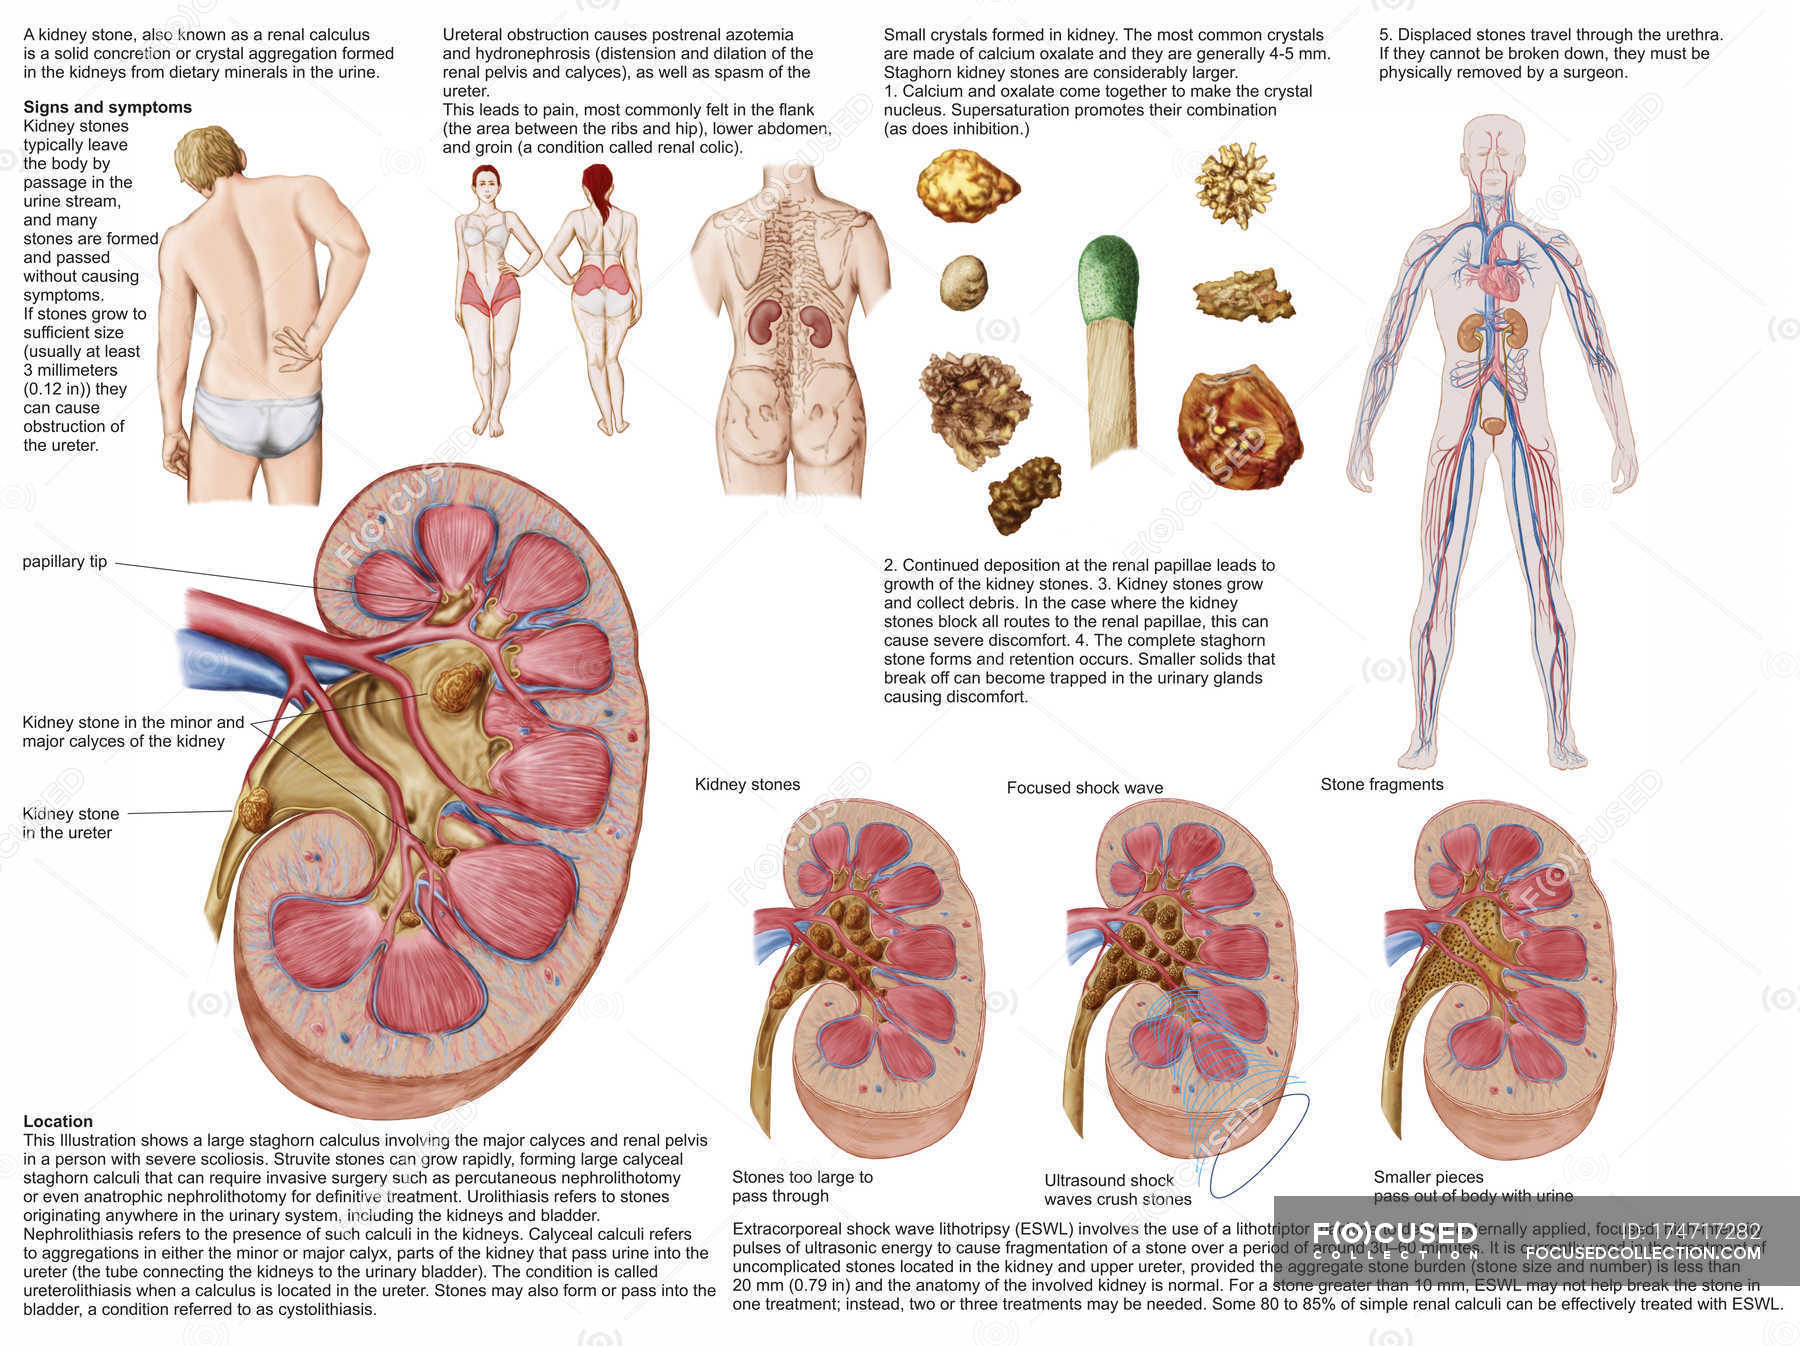 Medical chart with the signs and symptoms of kidney stones — renal